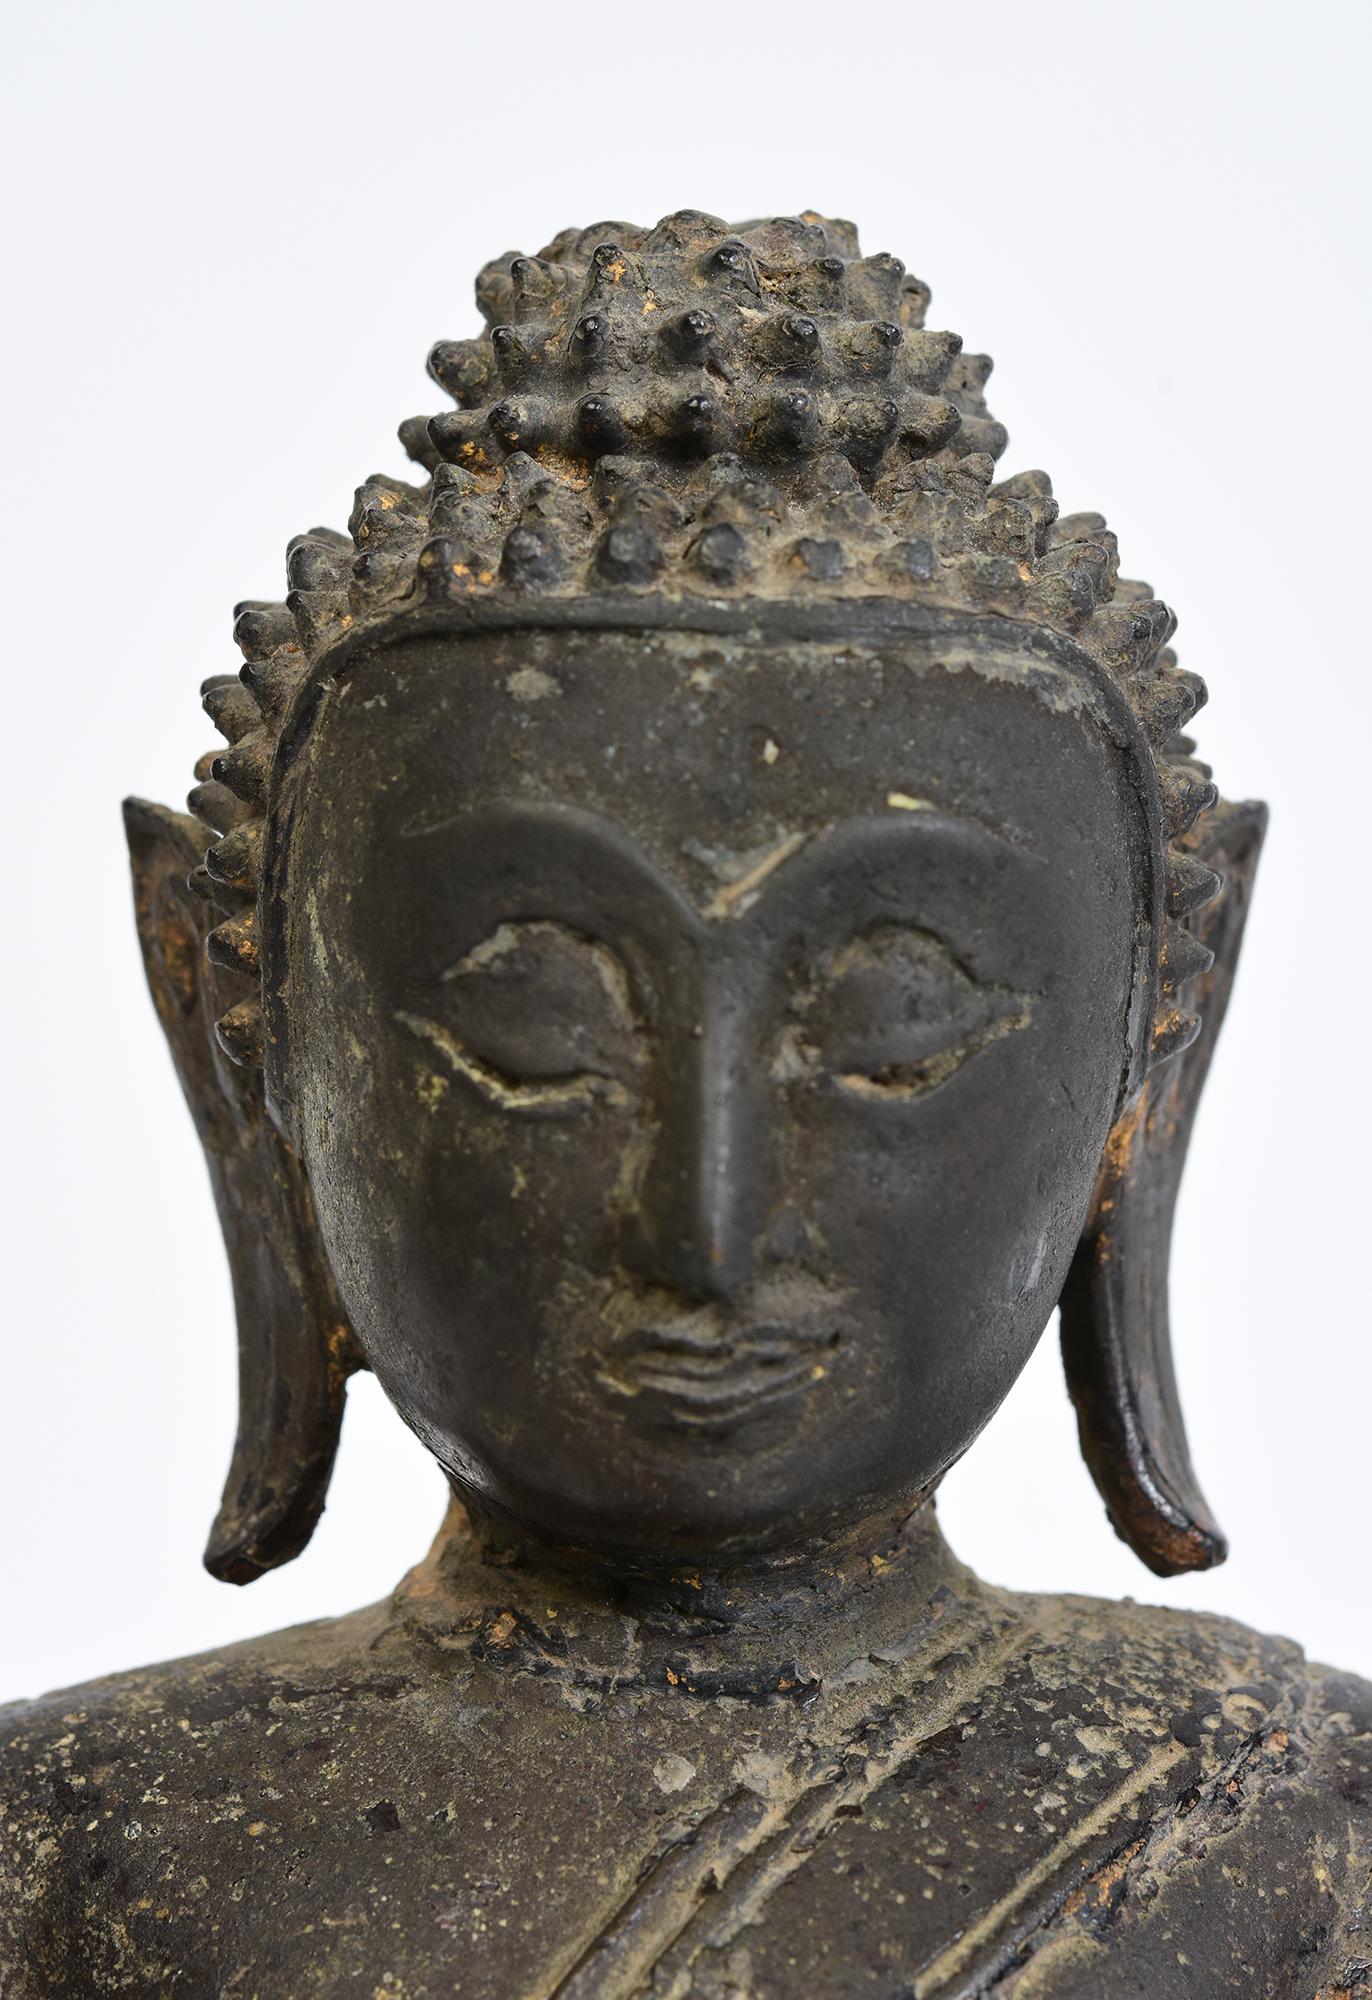 Antique Thai bronze Buddha sitting in Mara Vijaya (calling the earth to witness) posture on a base.

Age: Thailand, Ayutthaya Period, 17th Century
Size: Height 25.2 C.M. / Width 19.2 C.M. / Depth 11.7 C.M.
Condition: Nice condition overall (some